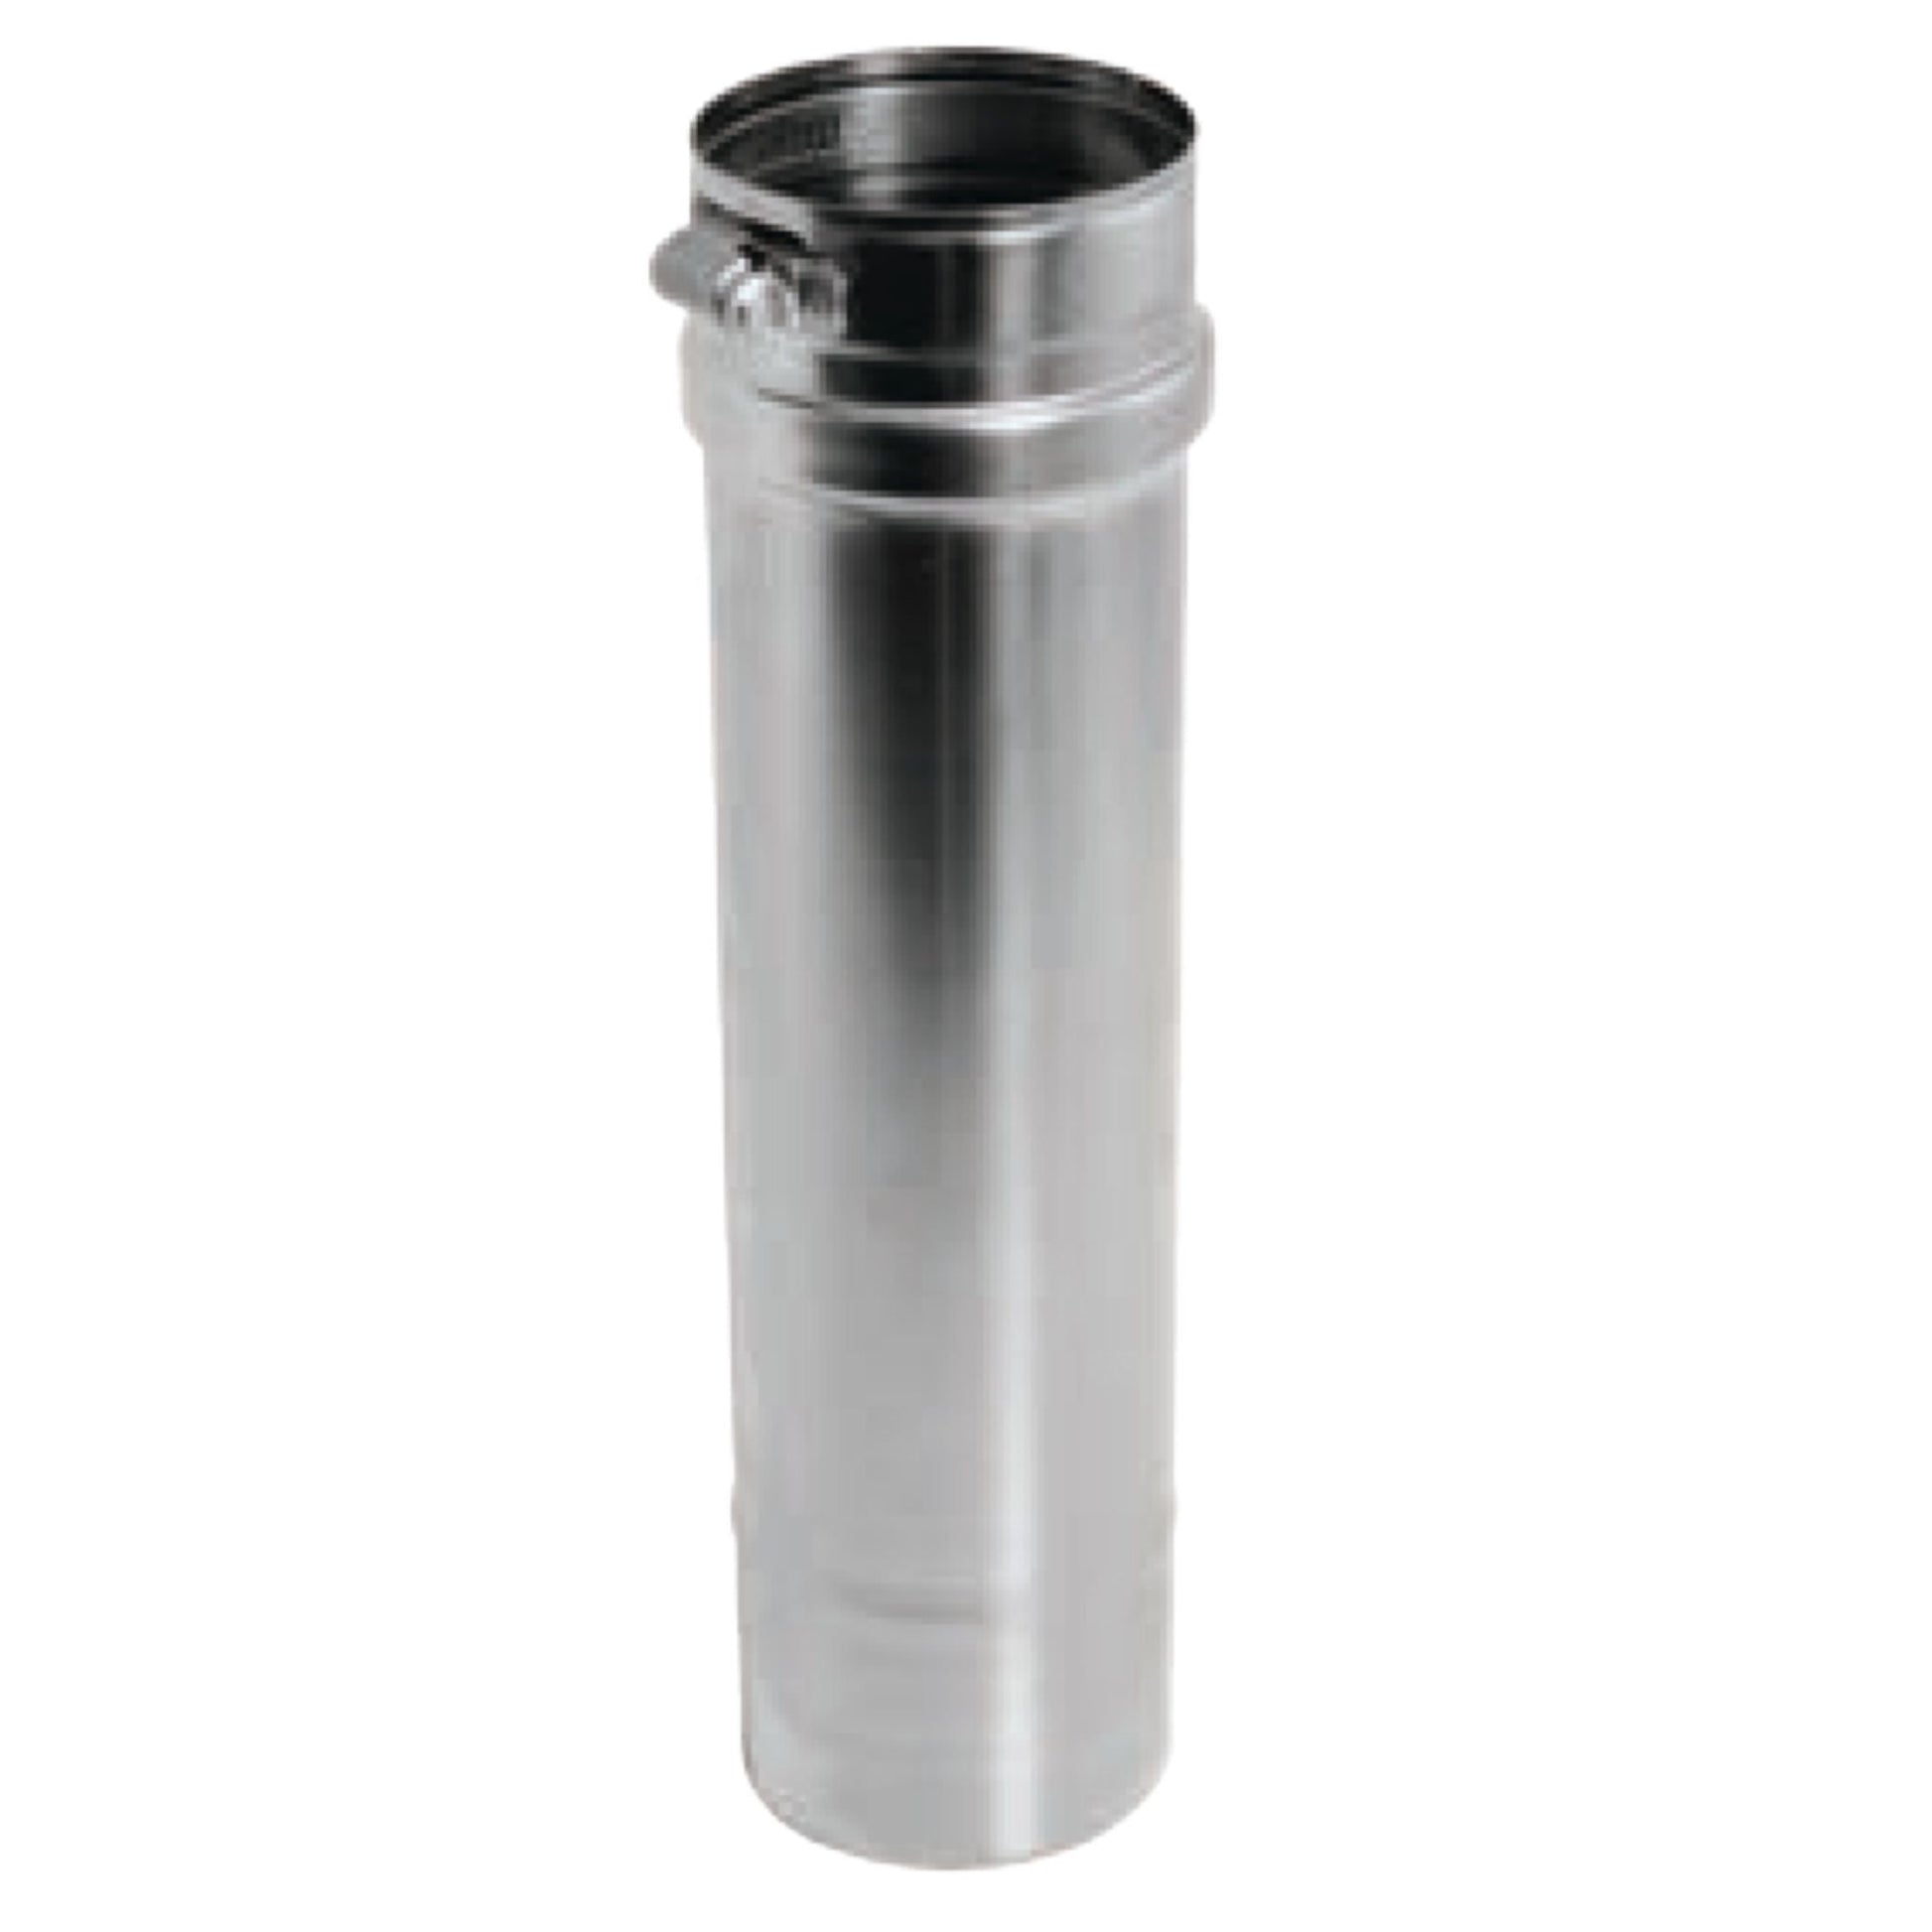 DuraVent FasNSeal 10" x 18" 316L Stainless Steel Vent Length